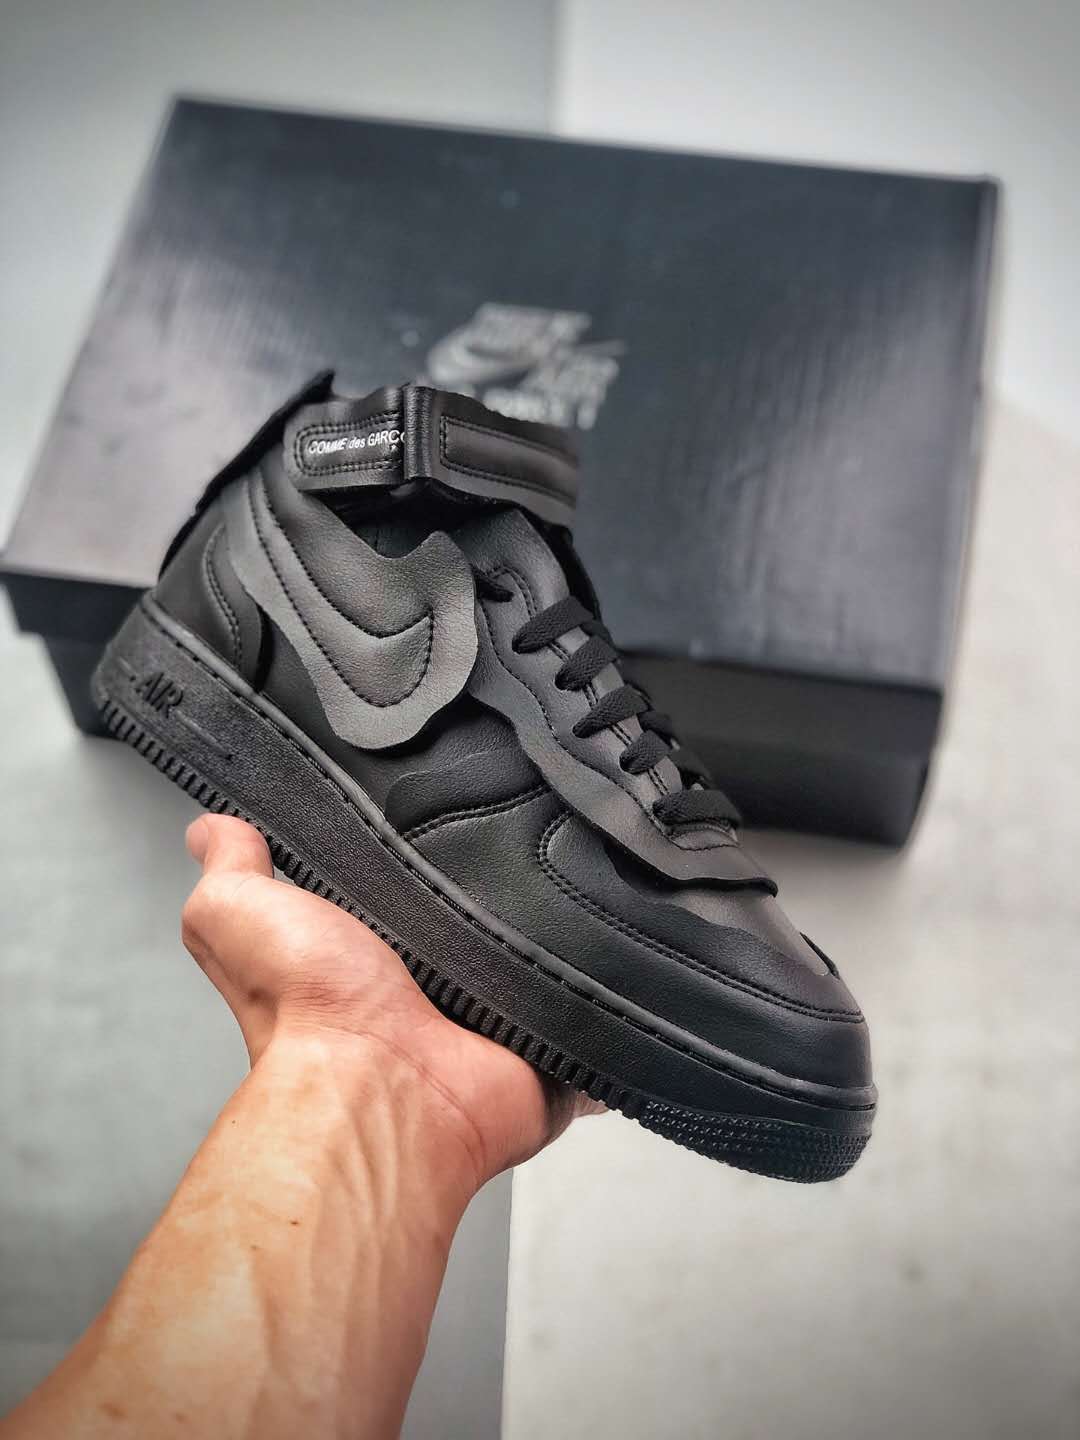 Nike Comme des Garçons x Air Force 1 Mid 'Triple Black' DC3601-001 - Stylish and Classic Black Sneakers